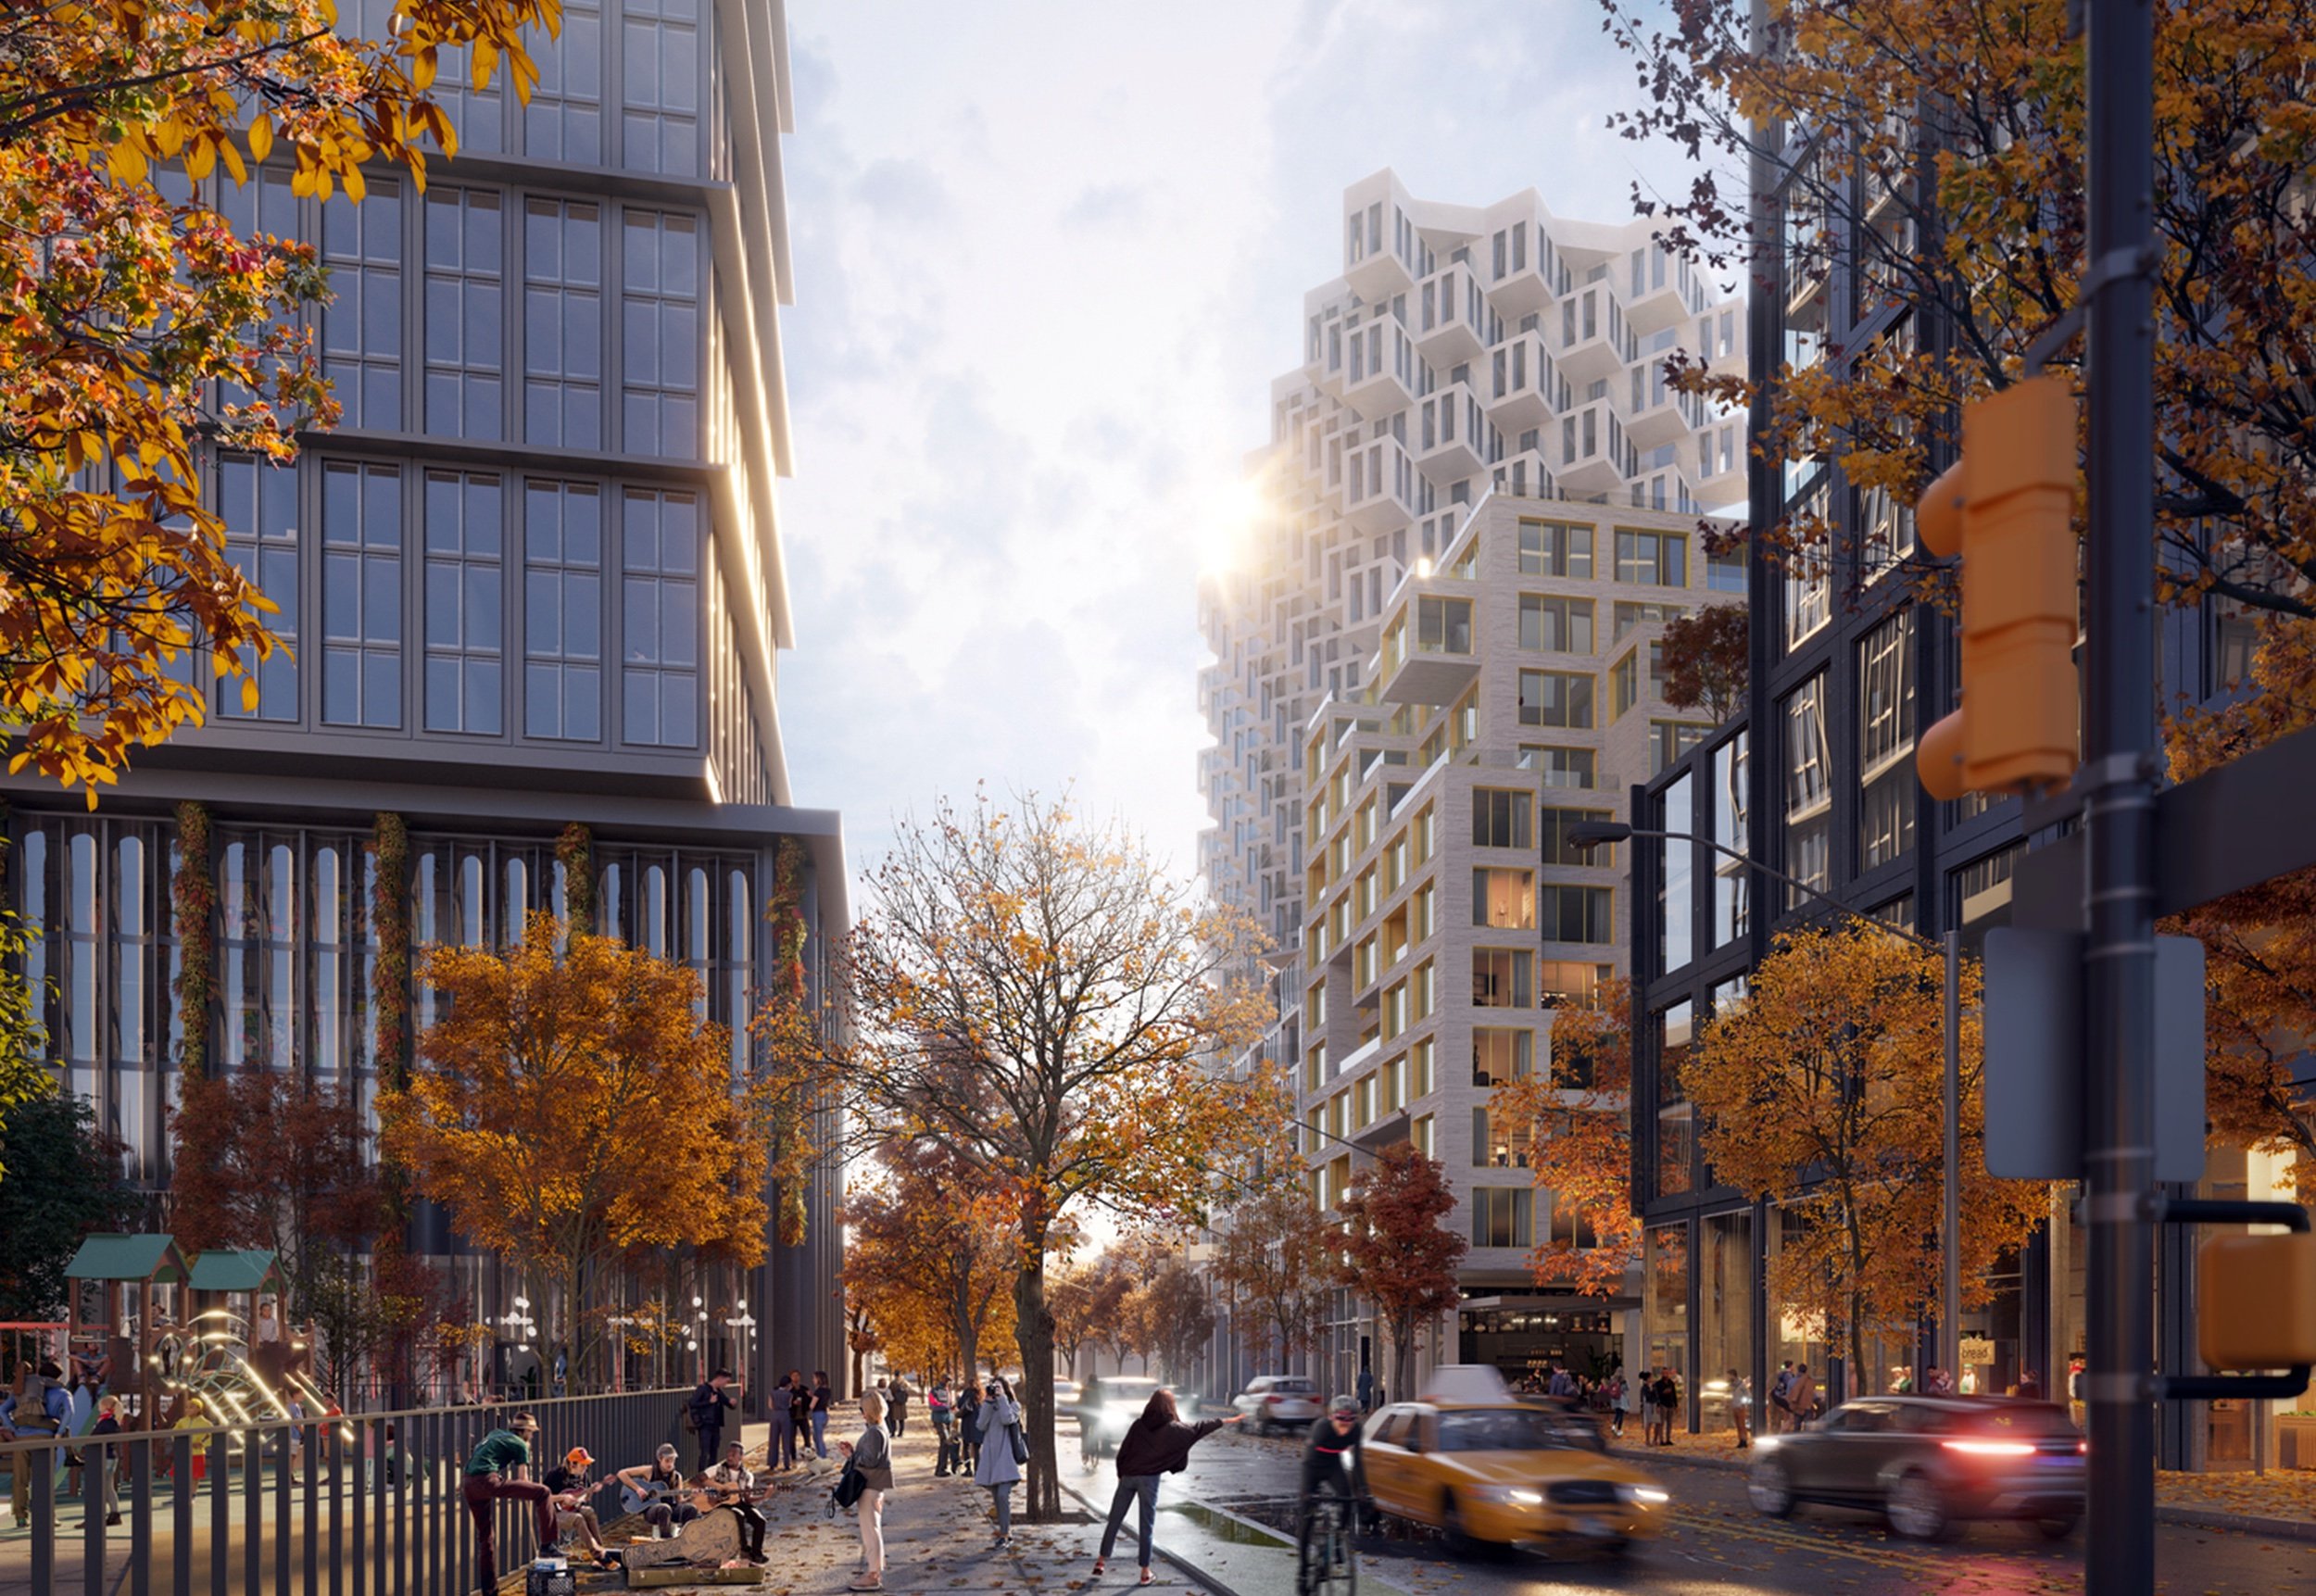 oda-designs-mixed-use-district-to-revitalize-the-astoria-neighborhood-in-new-york-city_22.jpg